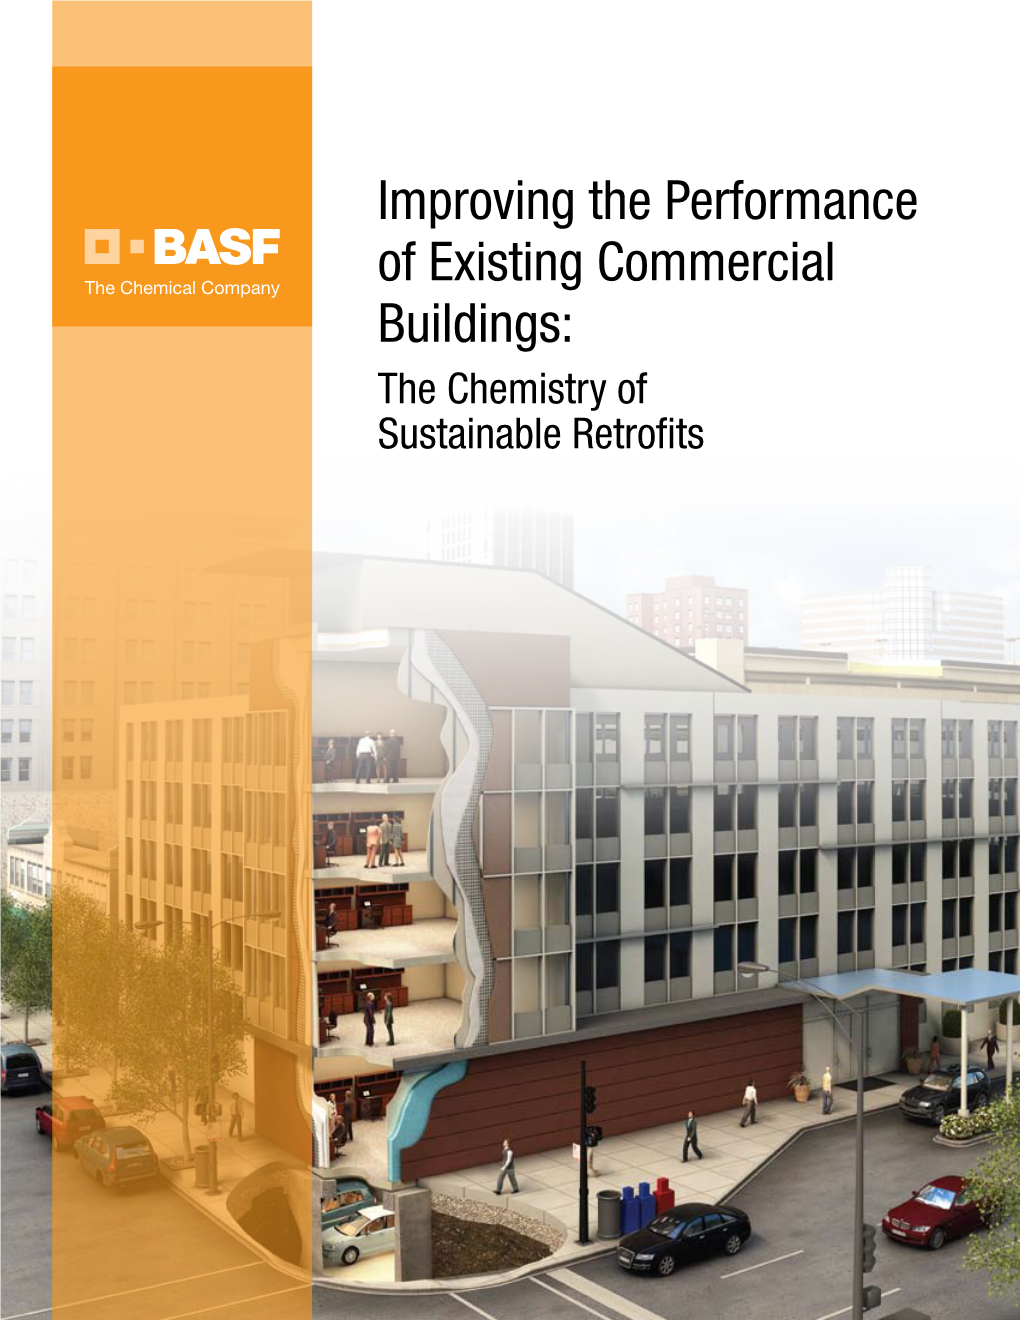 Improving the Performance of Existing Commercial Buildings